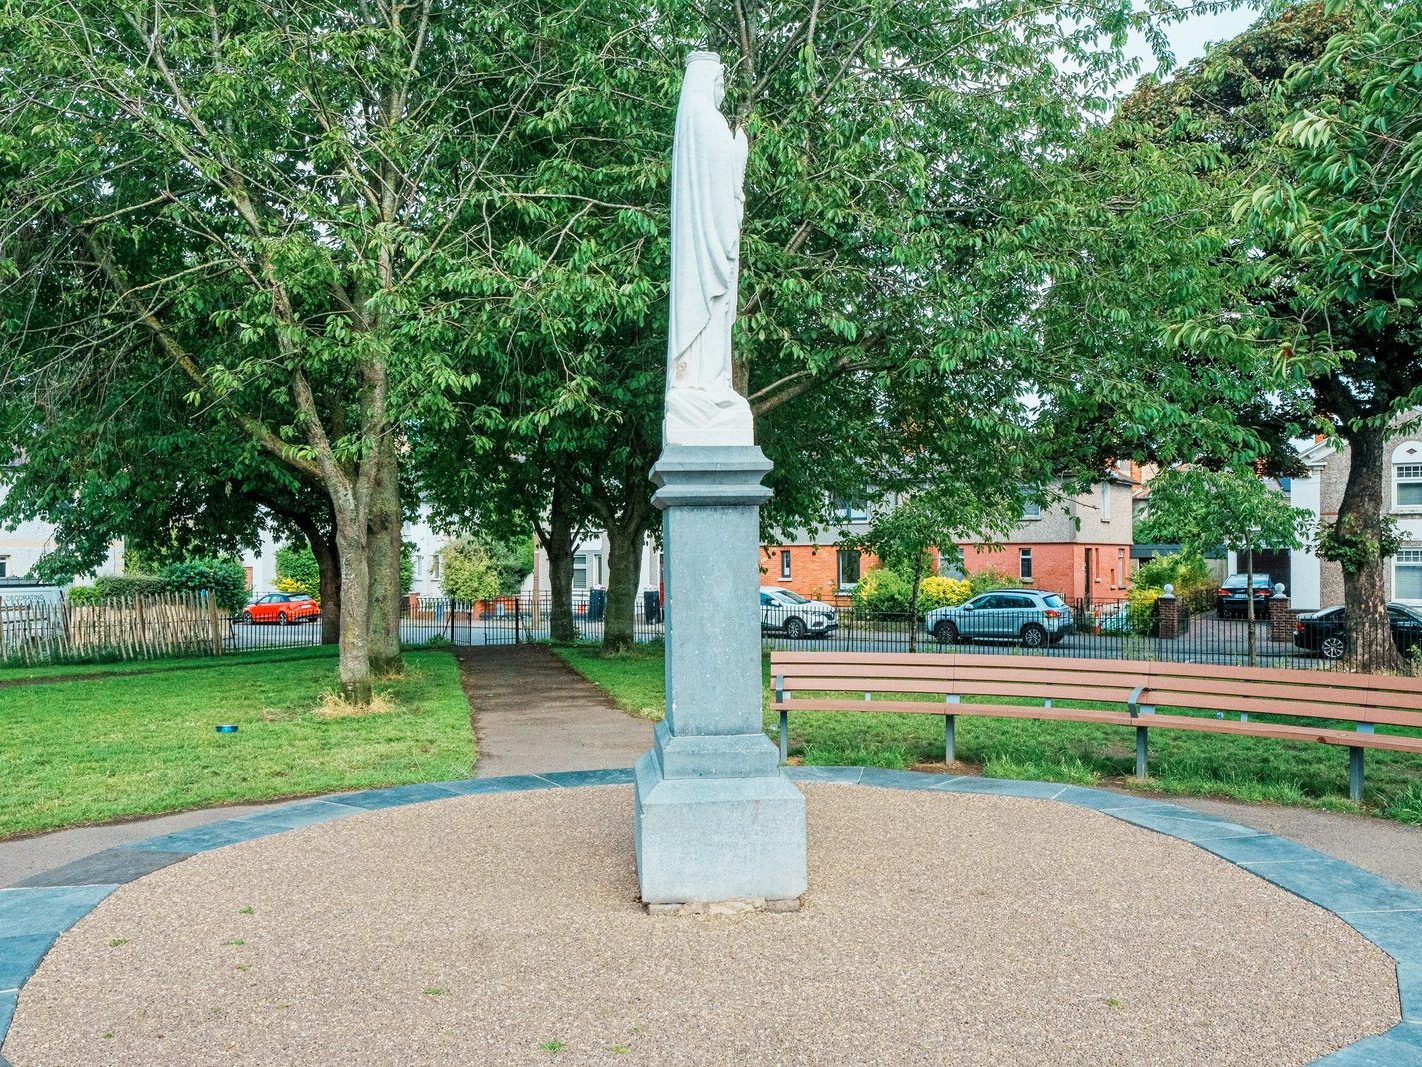 MARIAN STATUE ERECTED IN 1955 RATHER THAN 1955 [OSCAR SQUARE PARK] 001